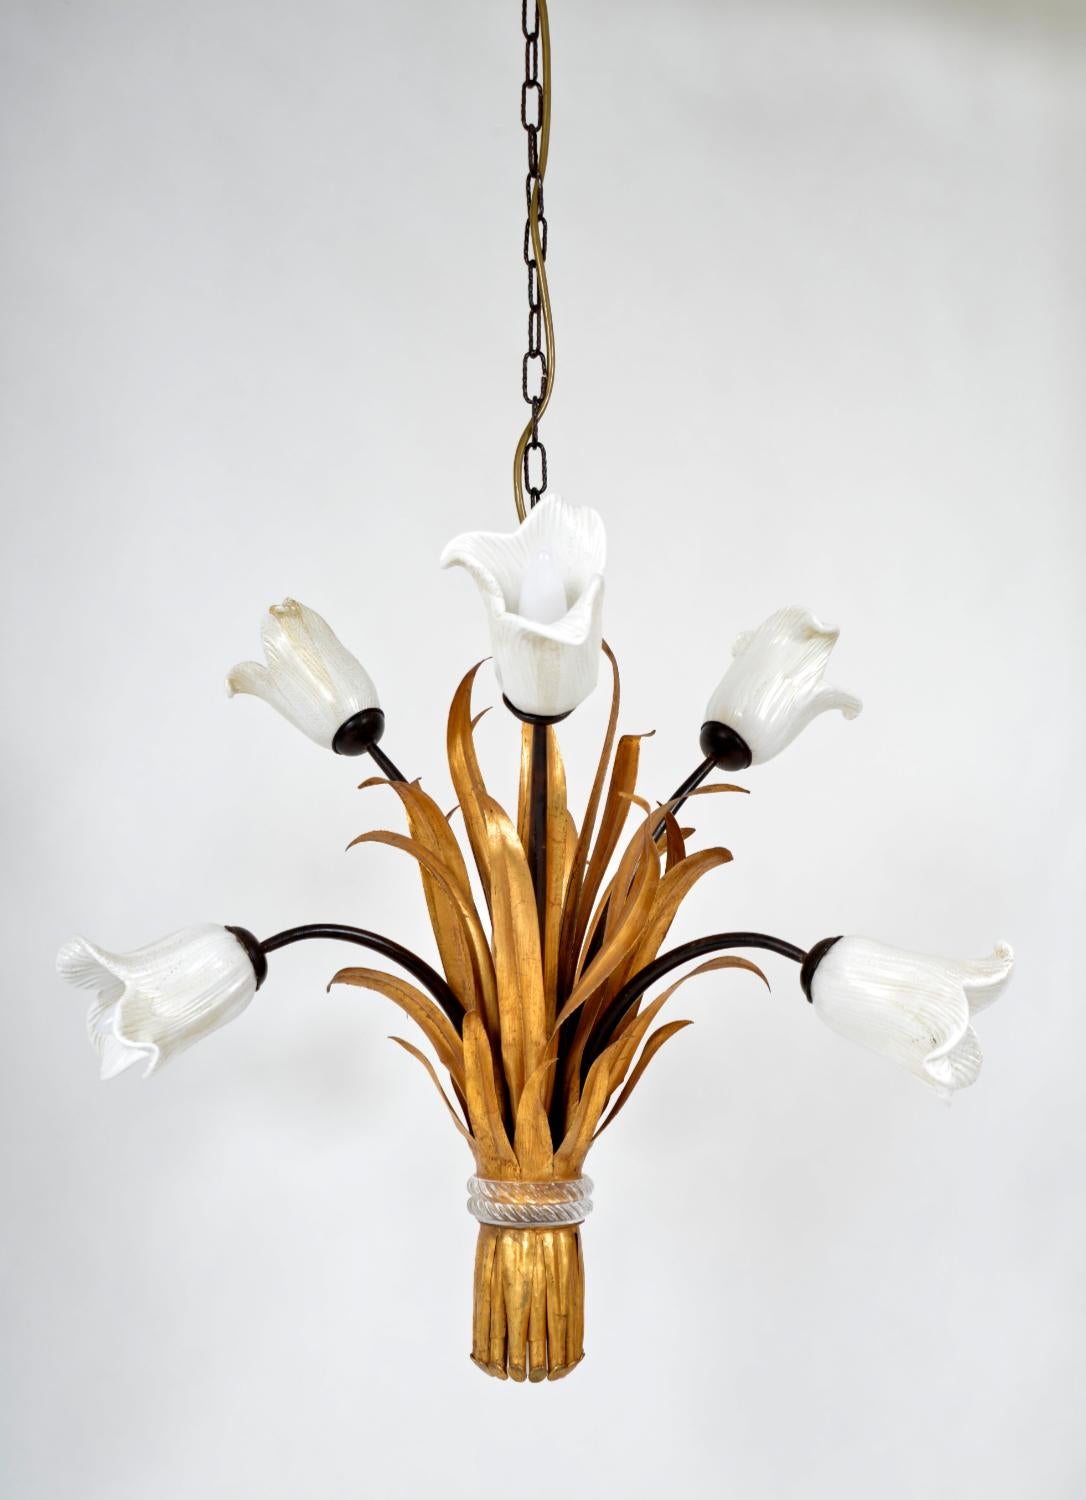 A stunning late 1970s Italian gilt toleware and glass chandelier by Banci of Florence, Italy from the ‘Tulipani’ Collection. 
Six beautifully sculptured, white Murano glass tulips embellished with golden spots perch on black metal stems, which